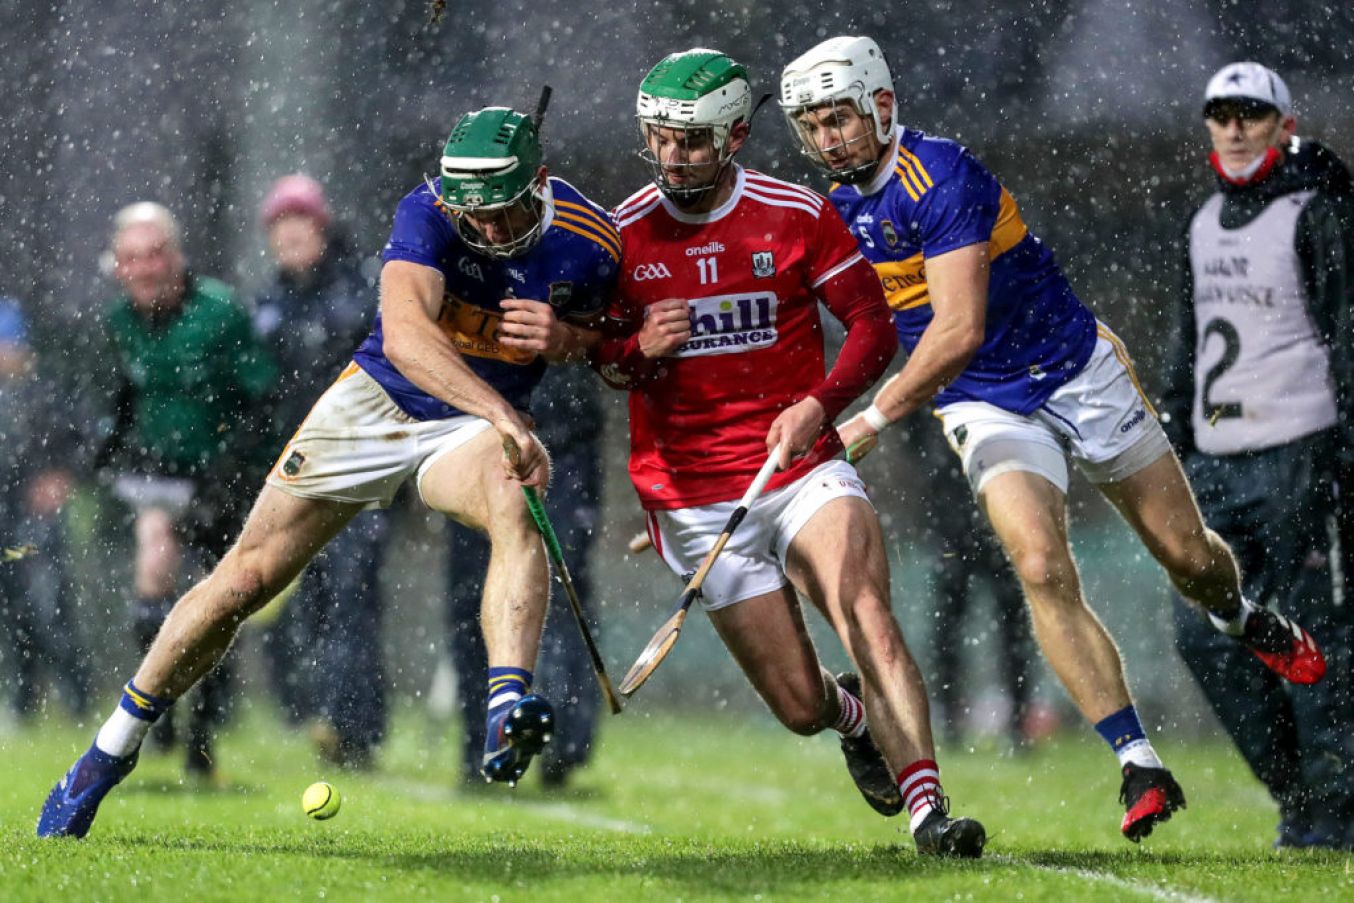 Strong Winds And Heavy Rain Proved A For Both Sides In The Gaelic Grounds. Credit ©Inpho/Laszlo Geczo